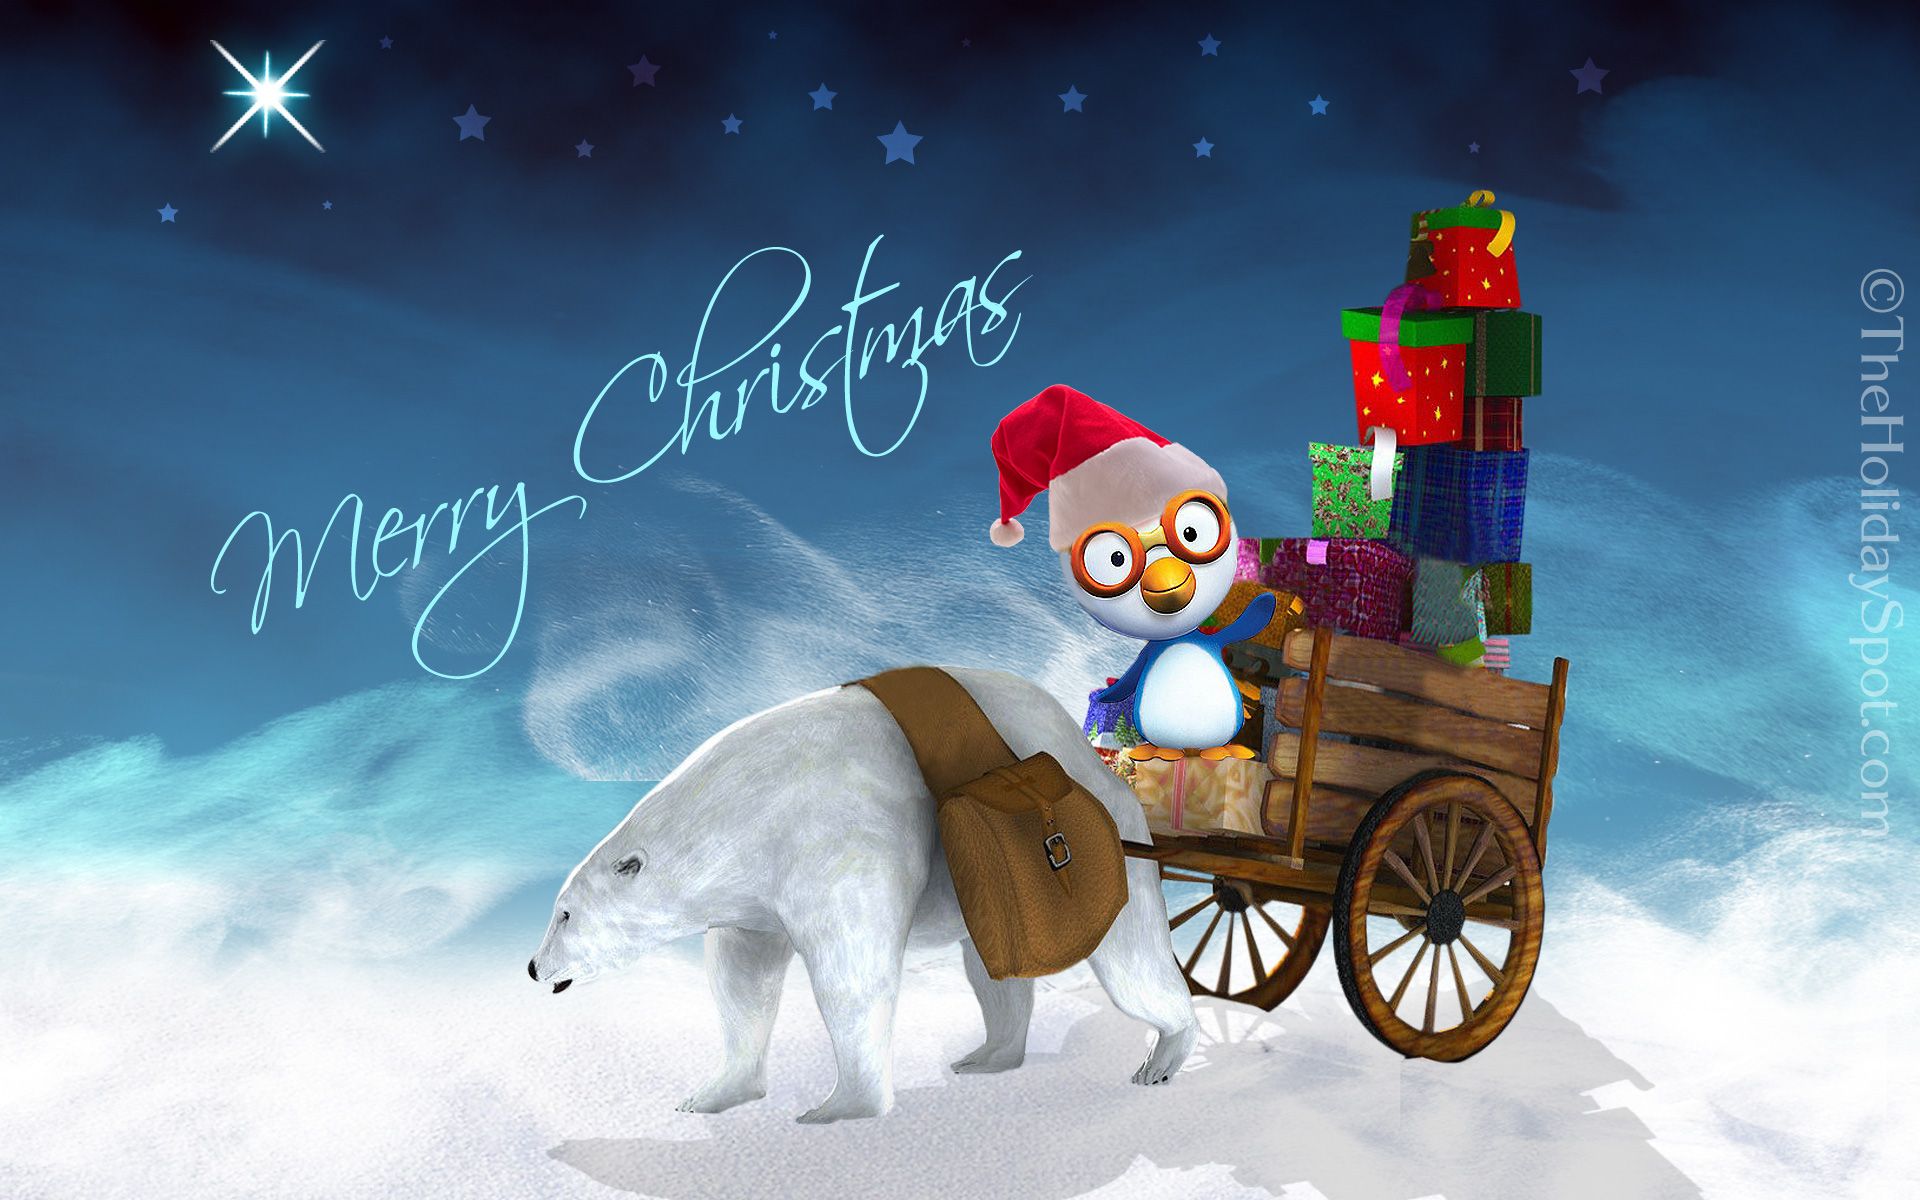 Top 10 High Quality Merry Christmas Backgrounds